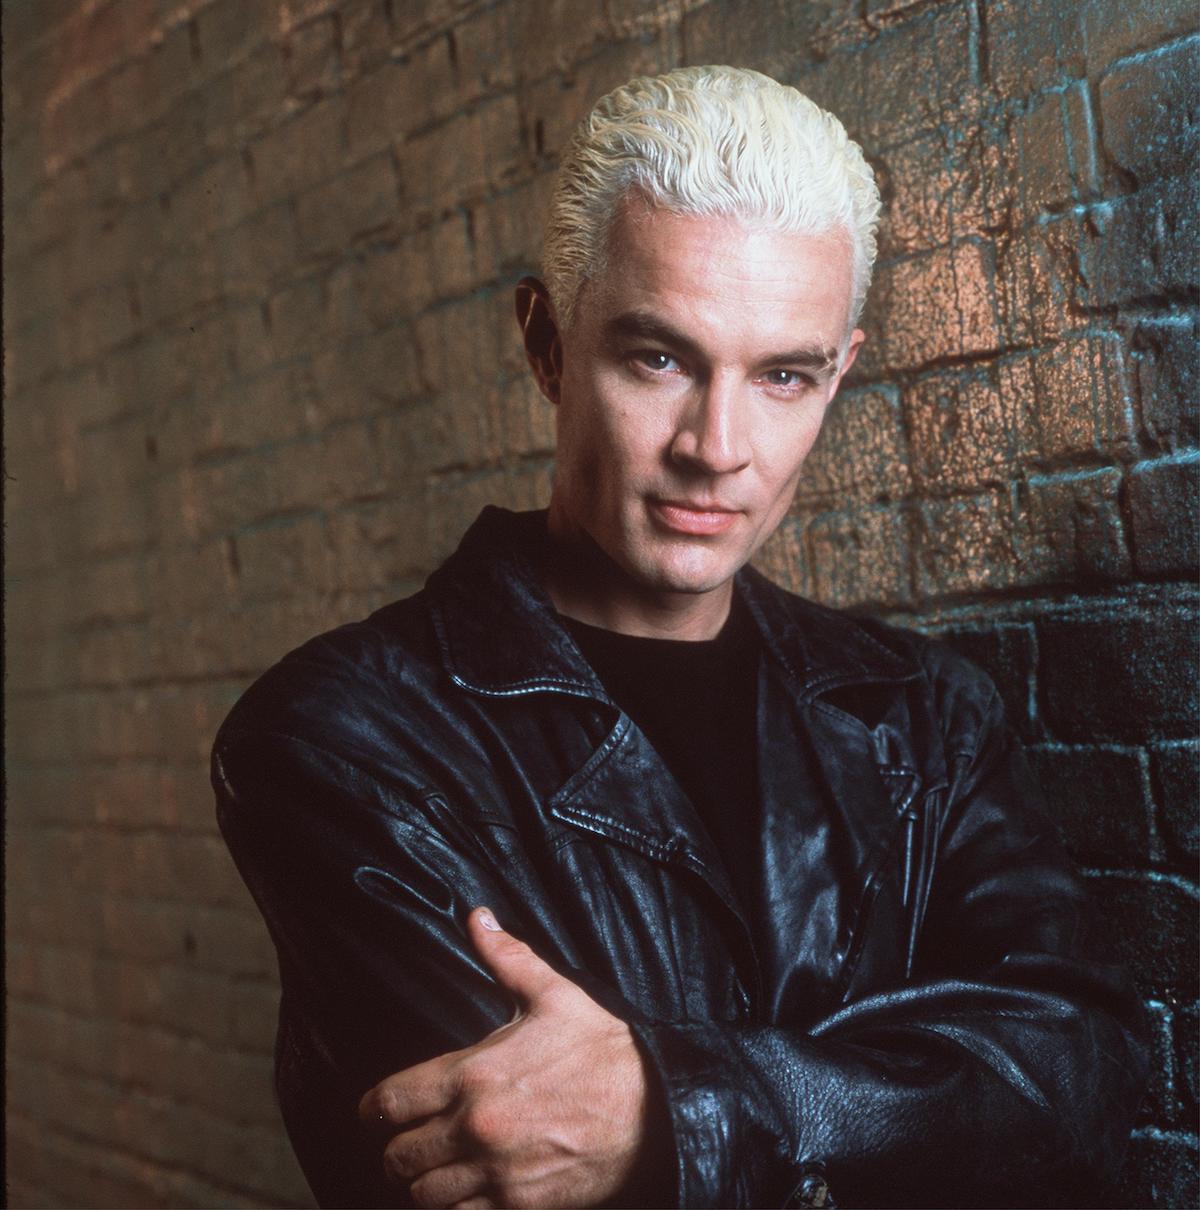 James Marsters as Spike stars in 20th Century Fox's "Buffy The Vampire Slayer Year 5."